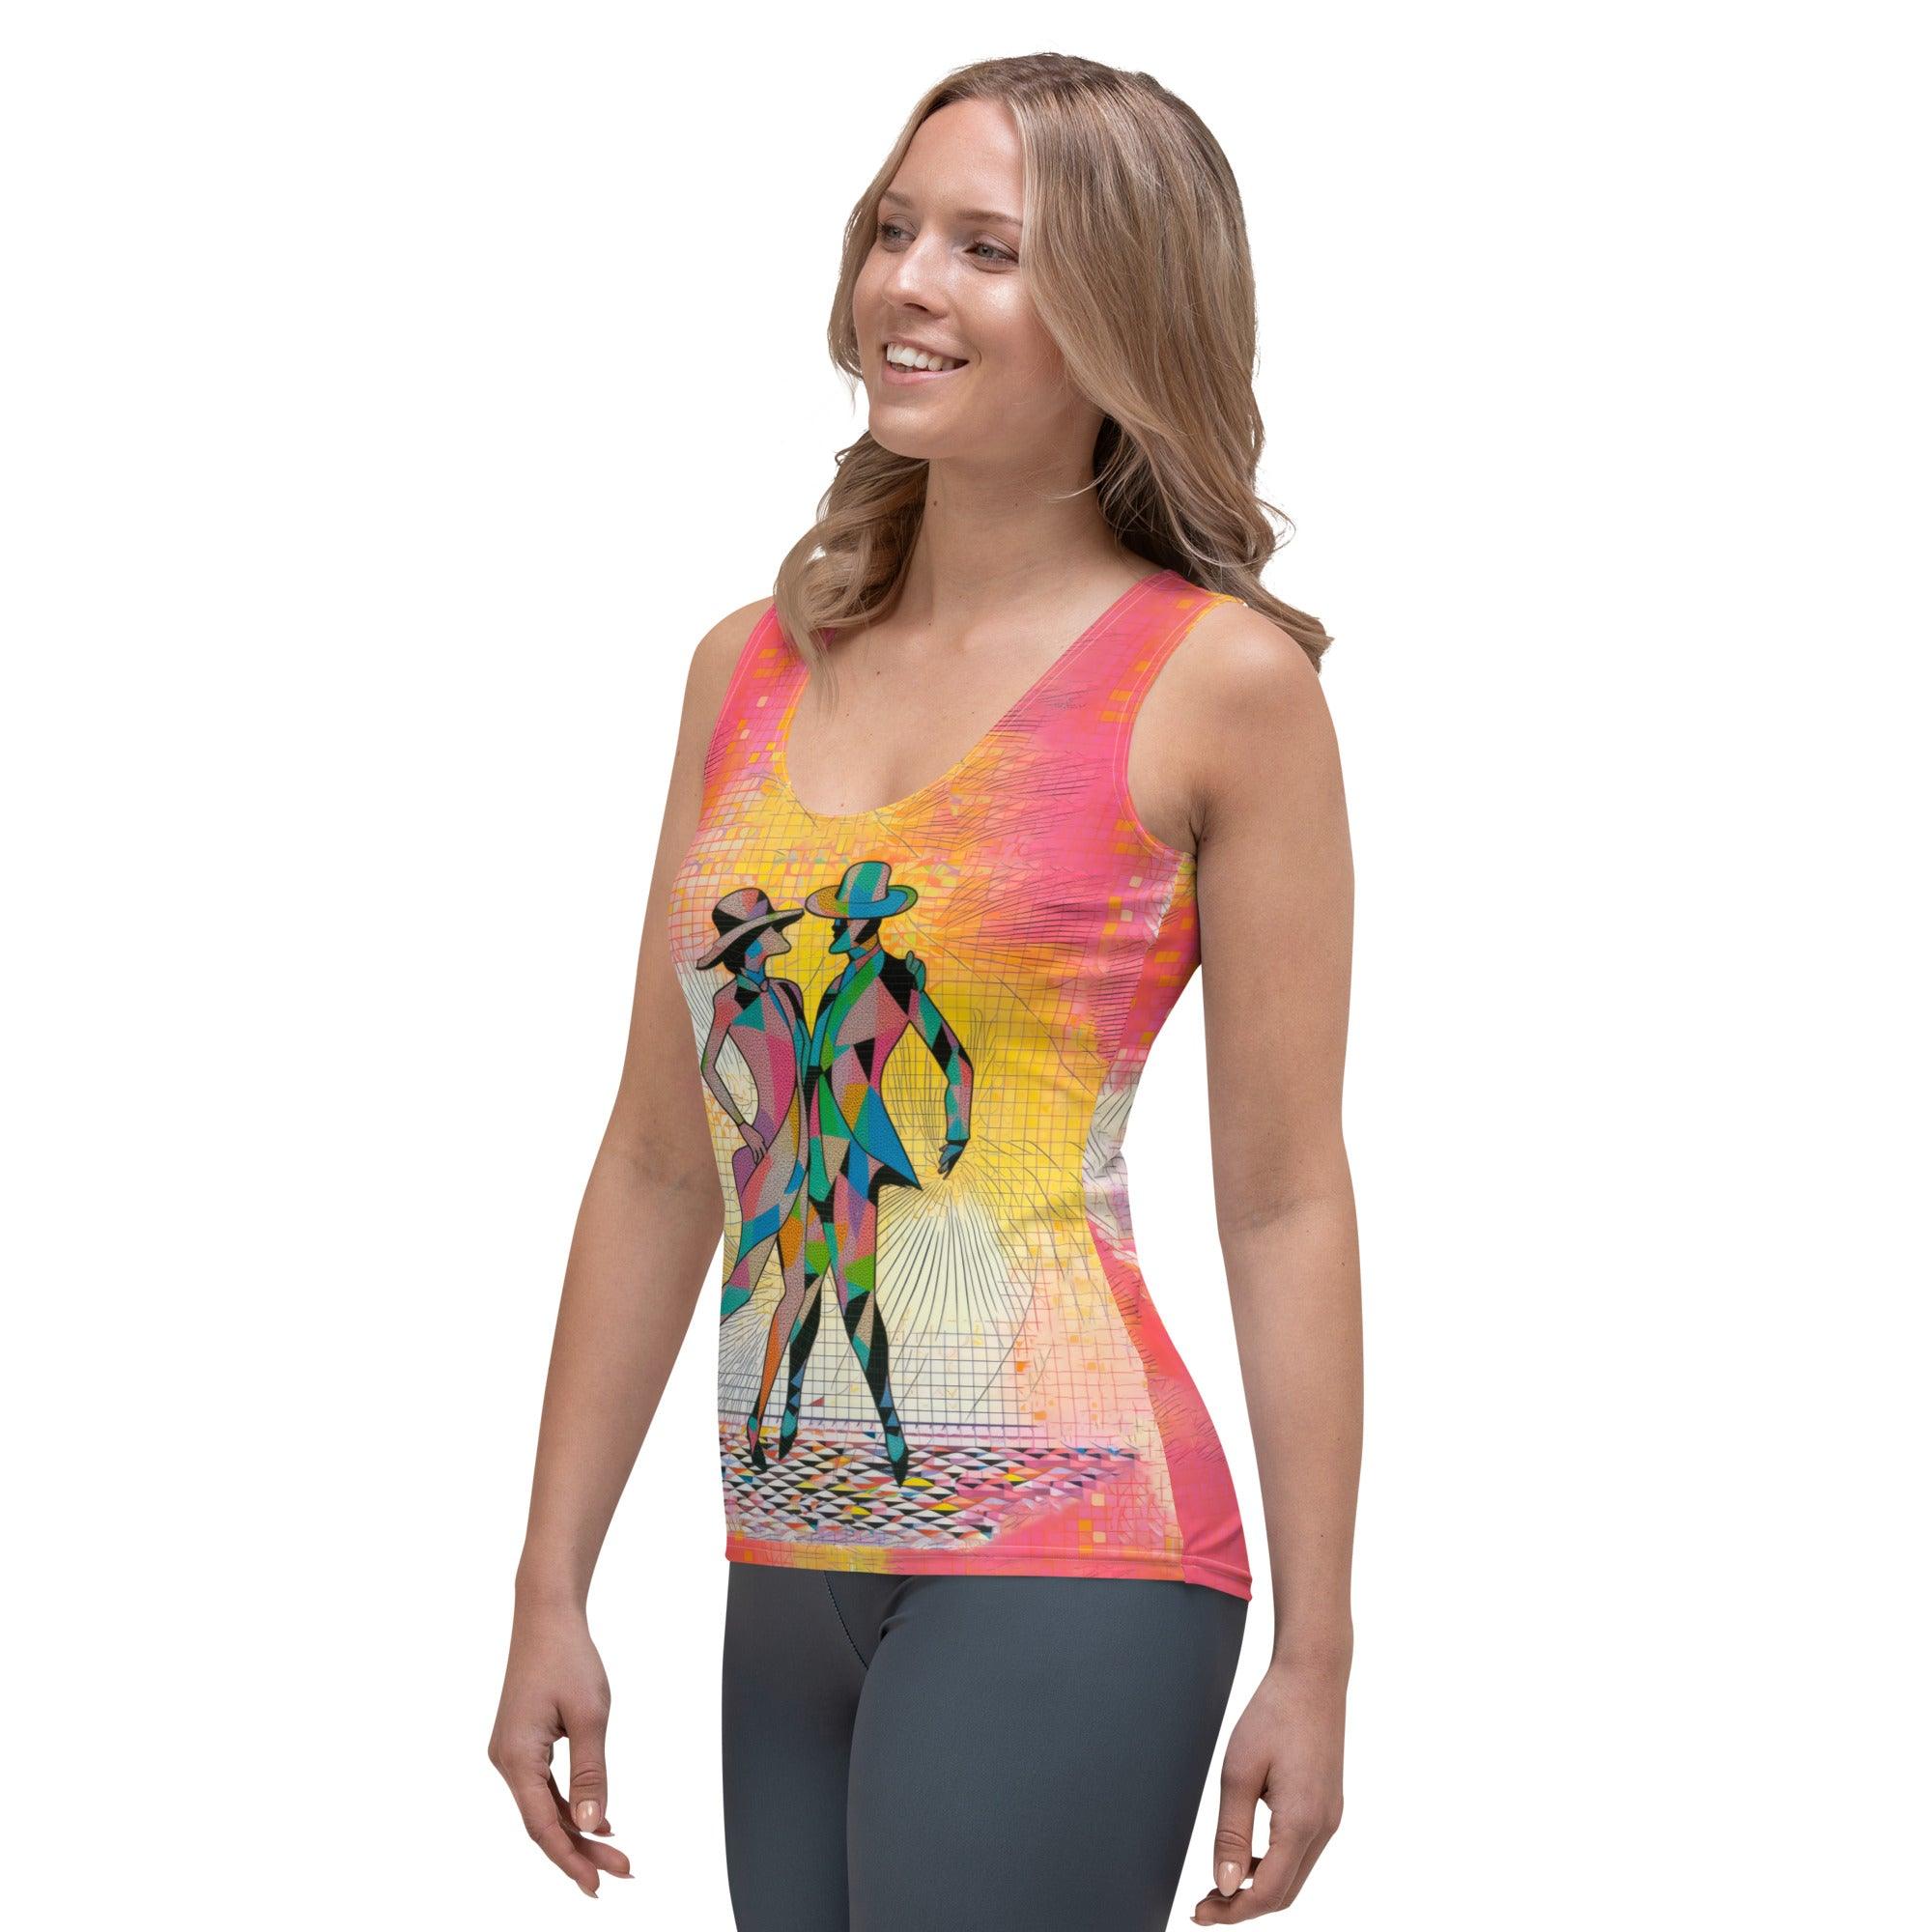 Back view of aerial balletic attire tank top design